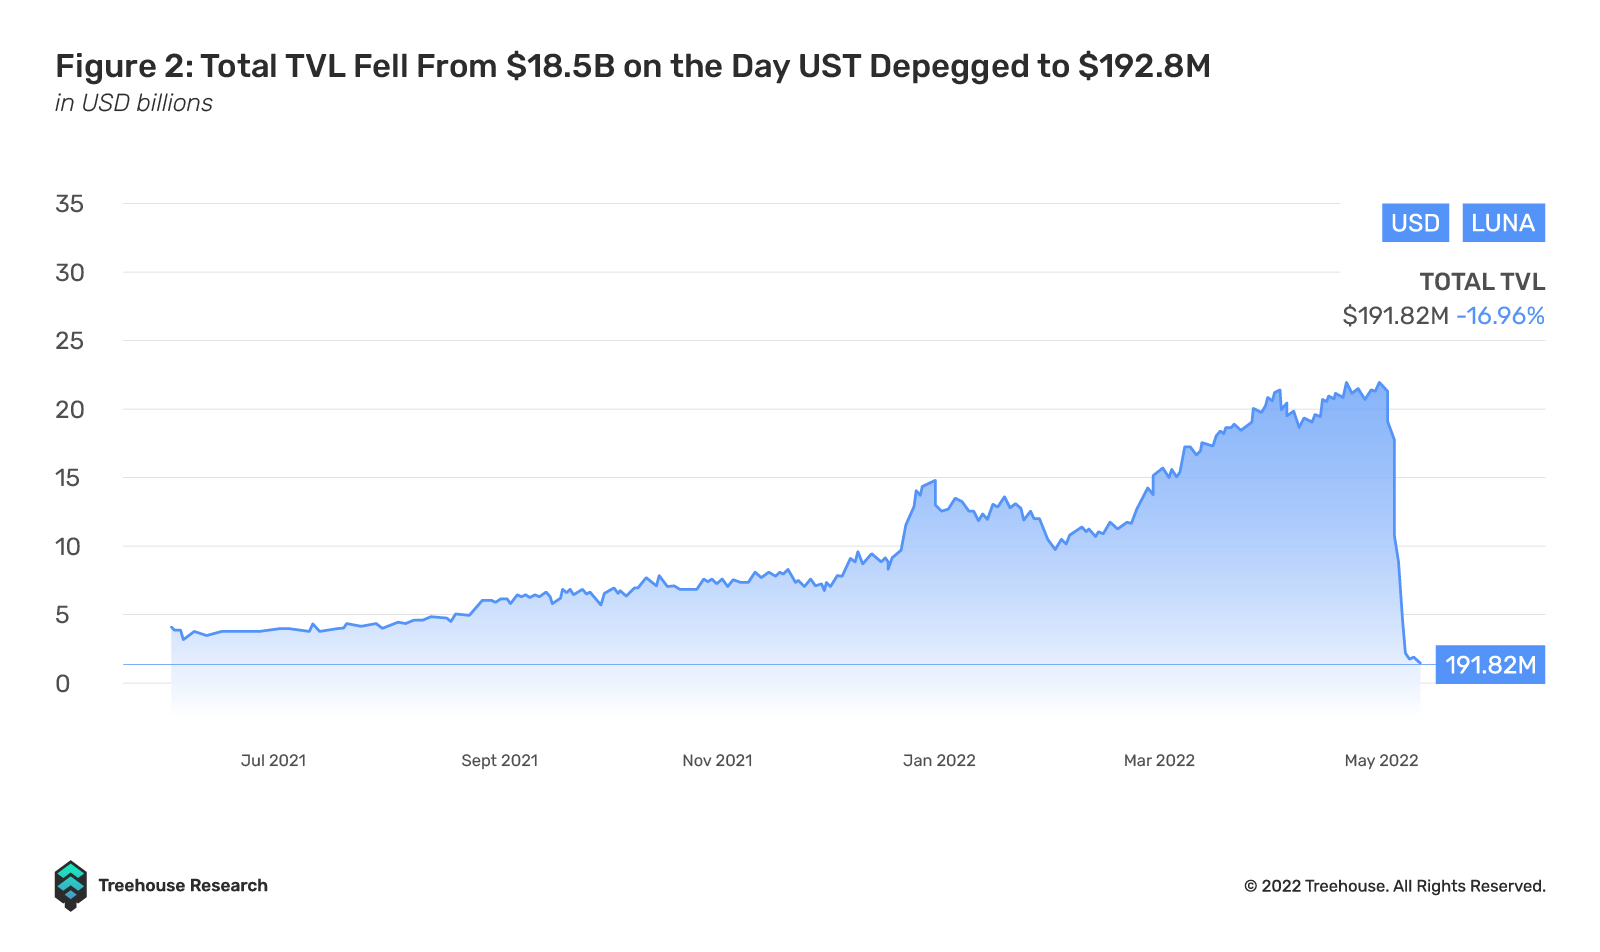 total tvl fell from $18.5B to $192.8M on the day of UST depeg